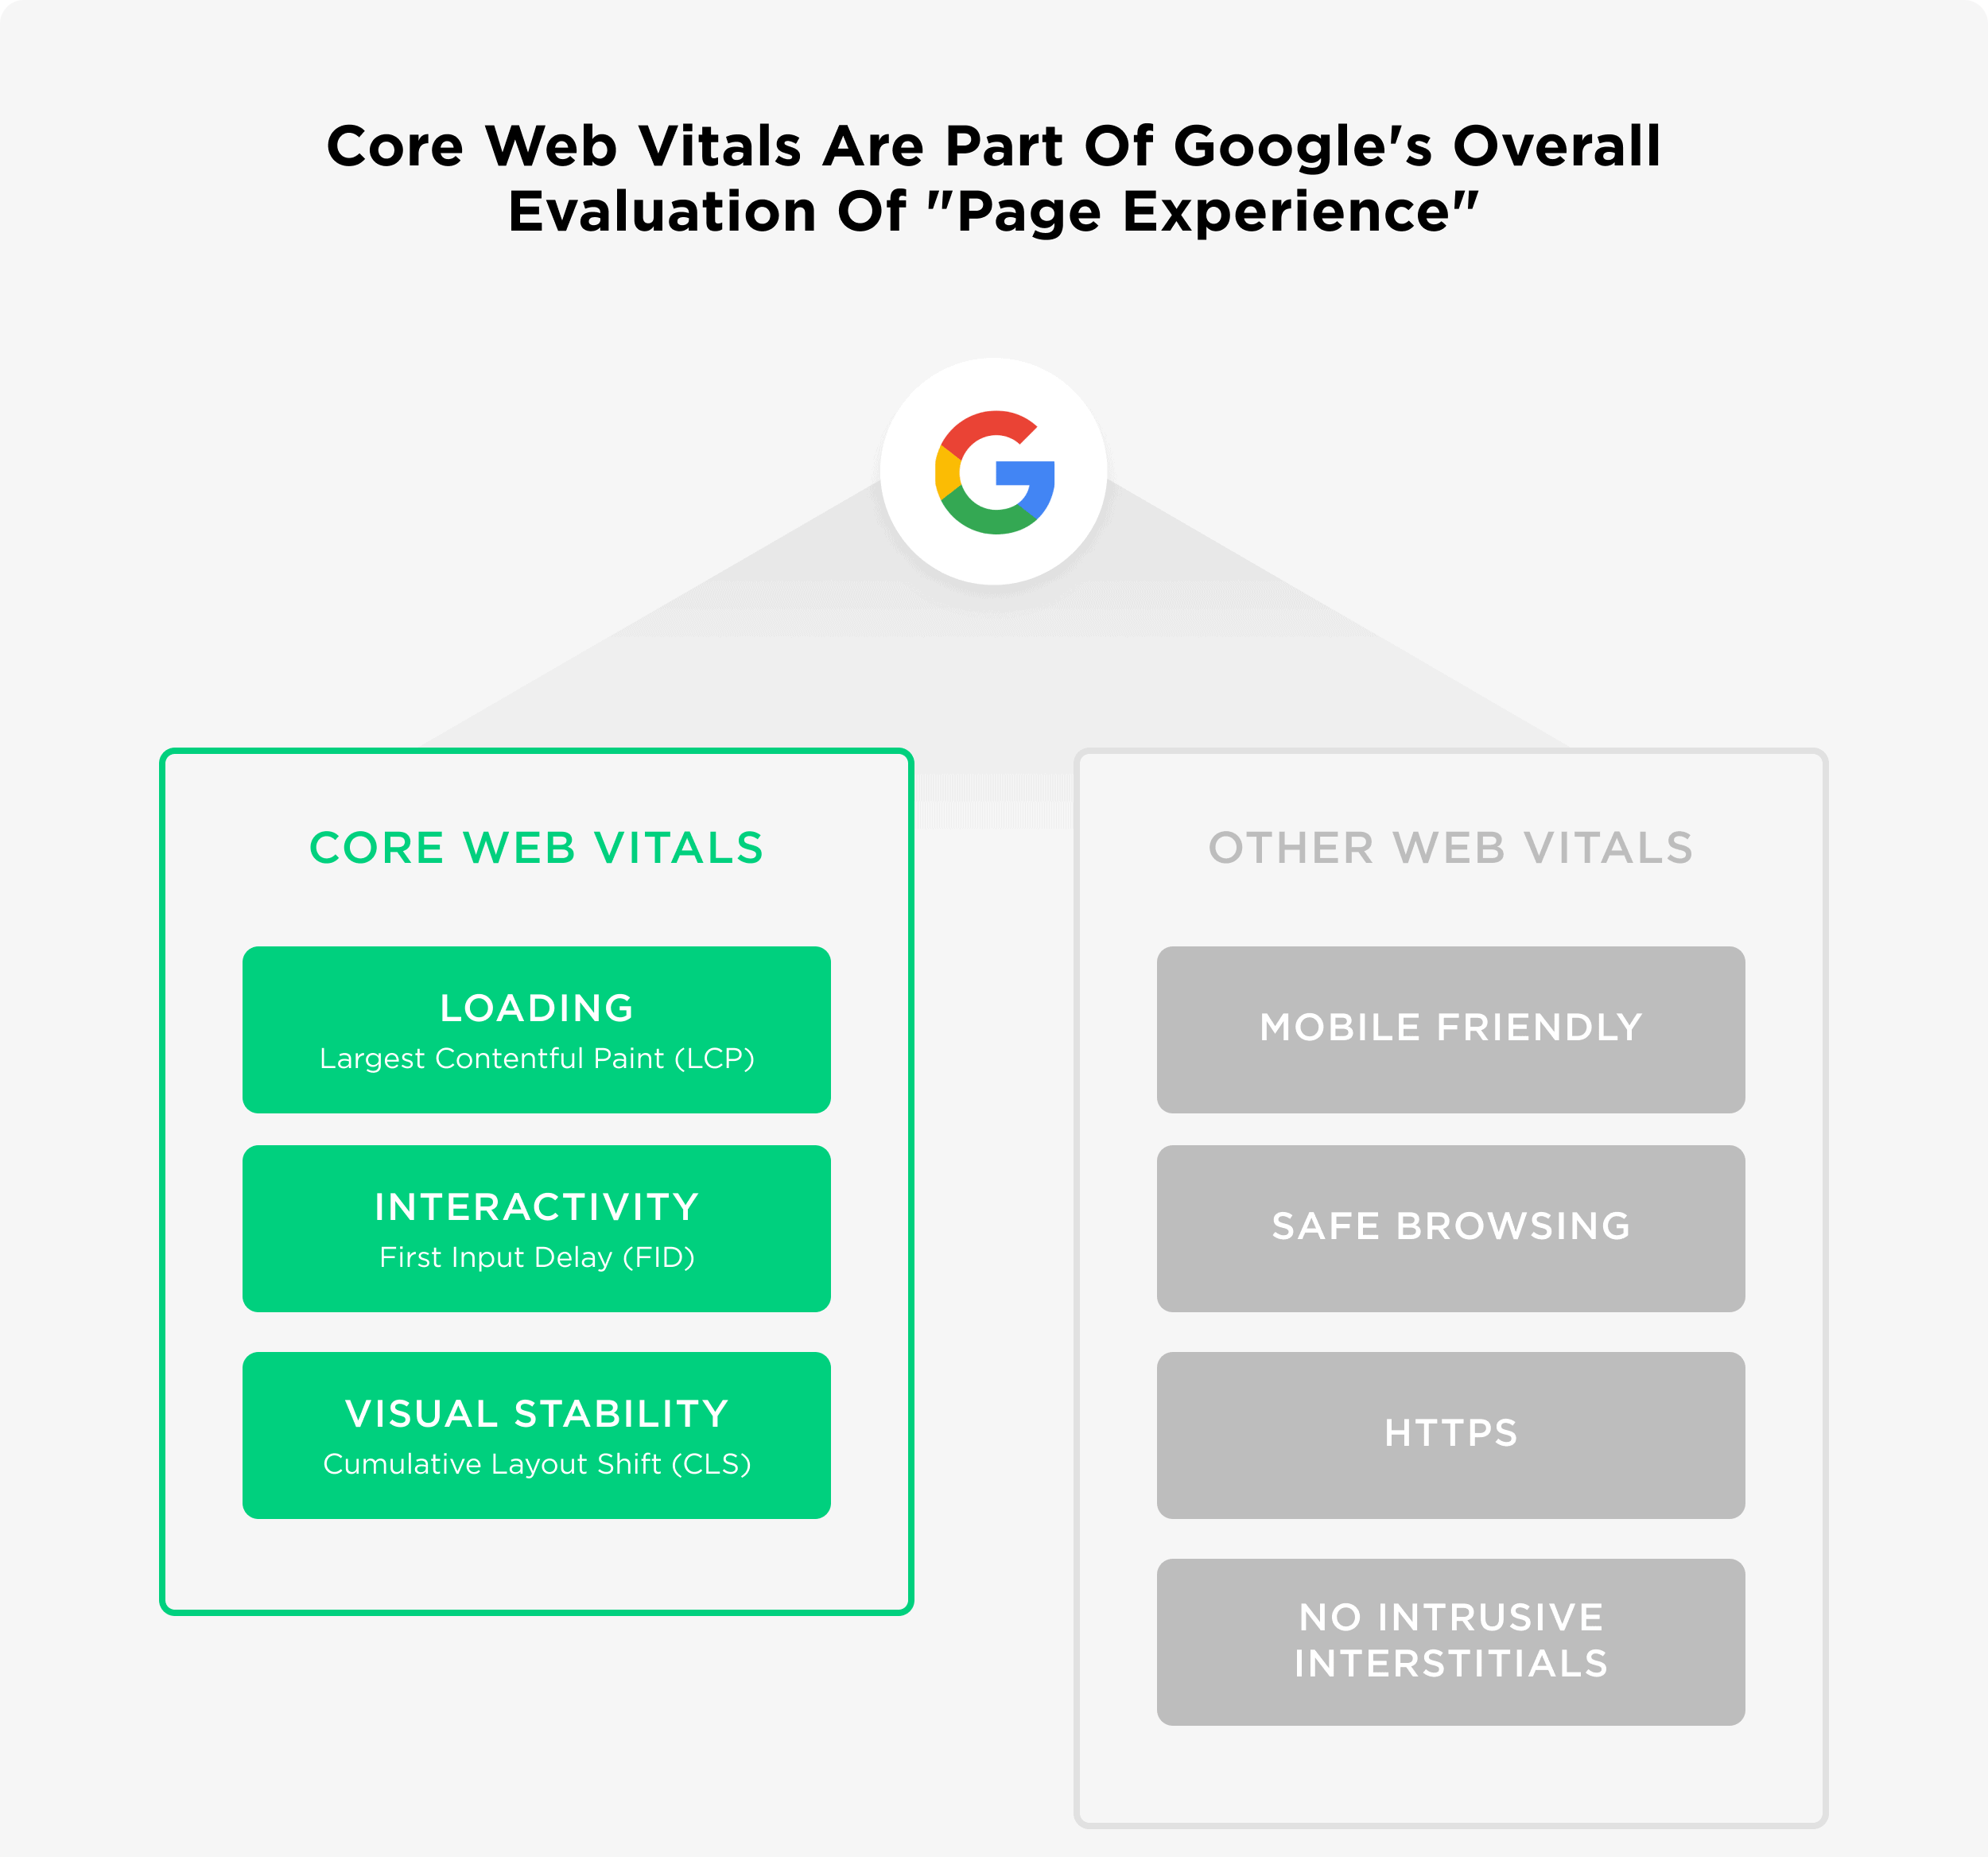 Crucial Web Vitals to Consider